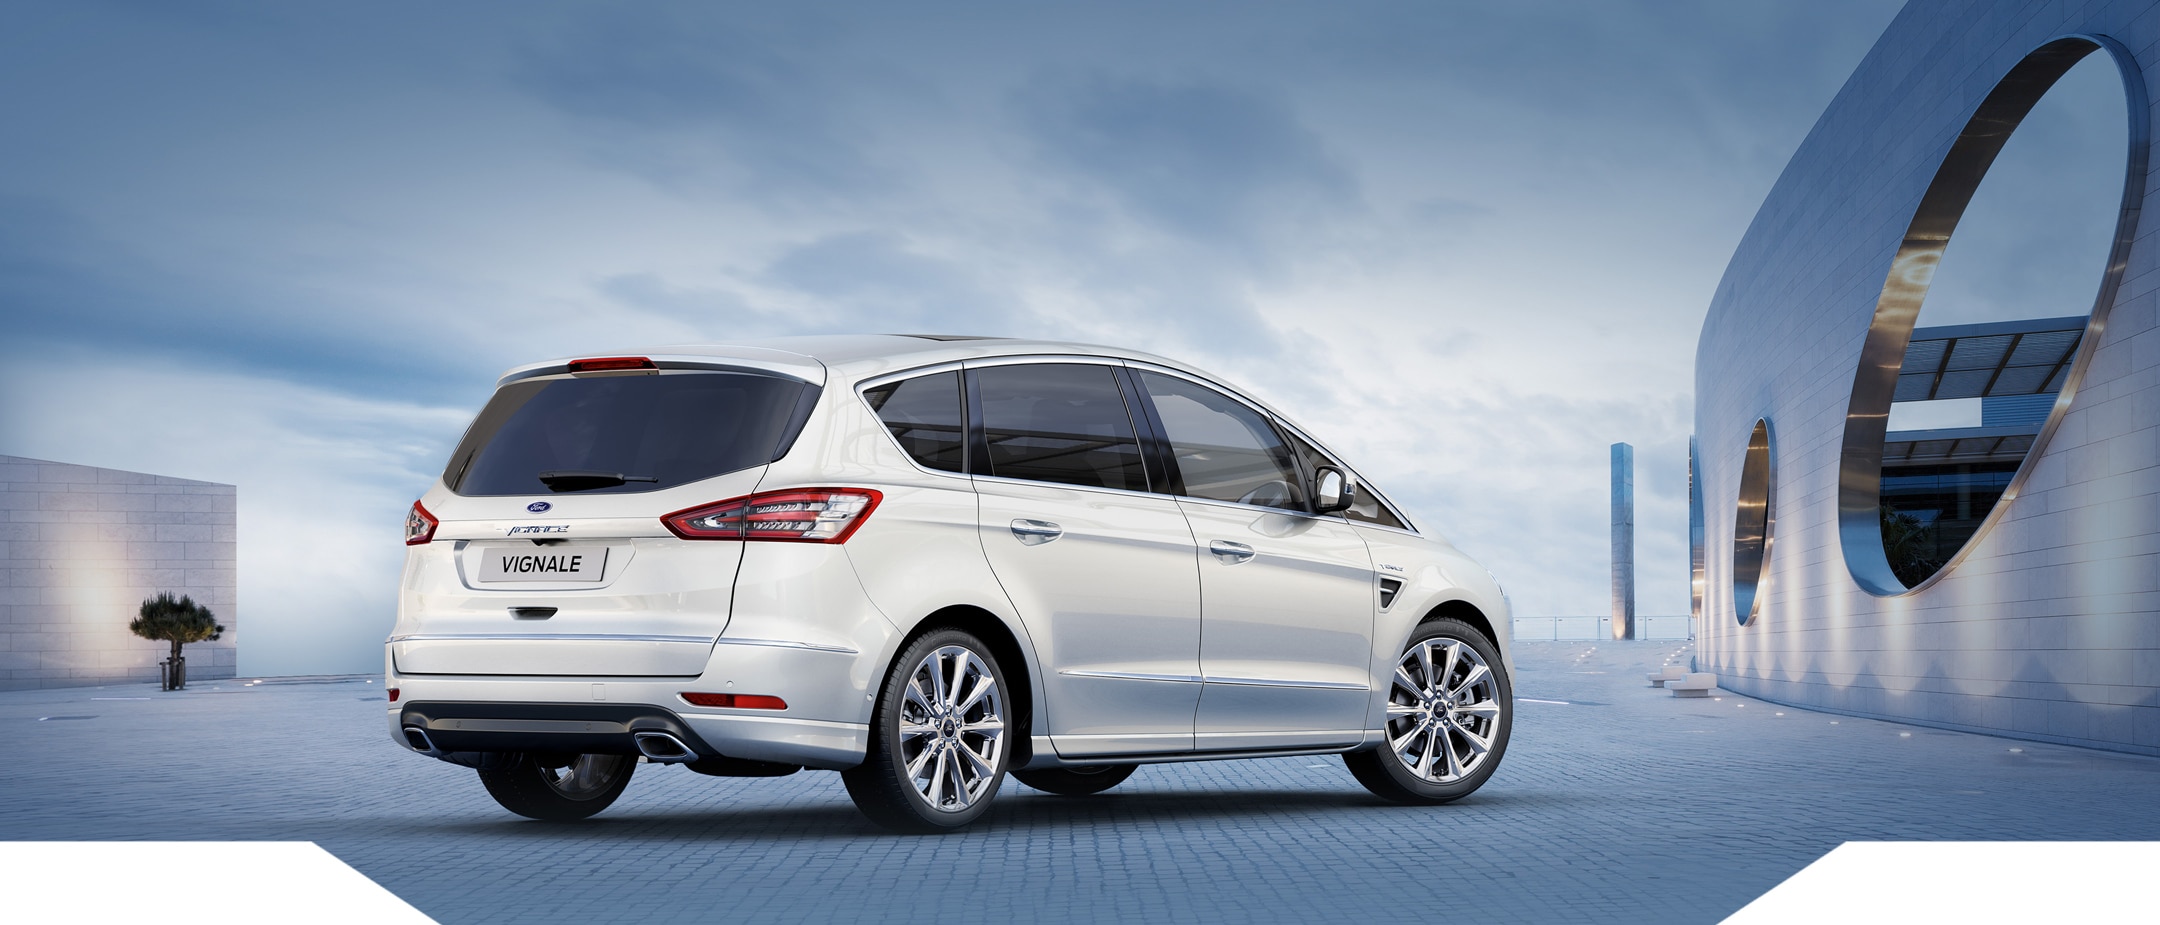 White Ford S-MAX Vignale from rear right view standing at a plaza